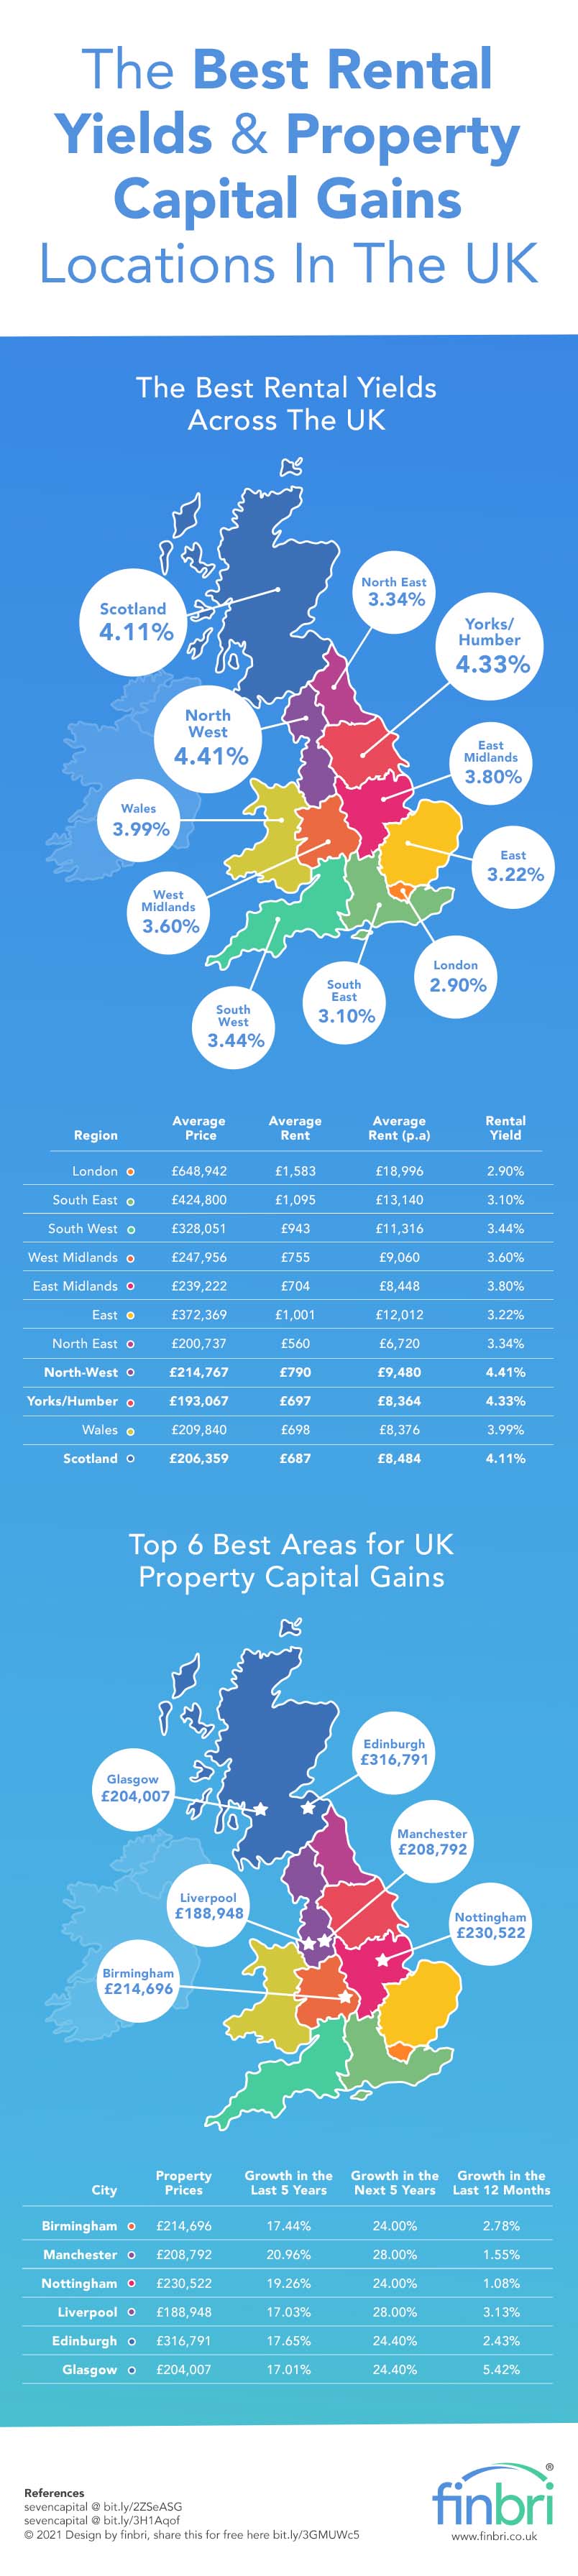 The Best Rental Yields & Property Capital Gains Locations in the UK Image